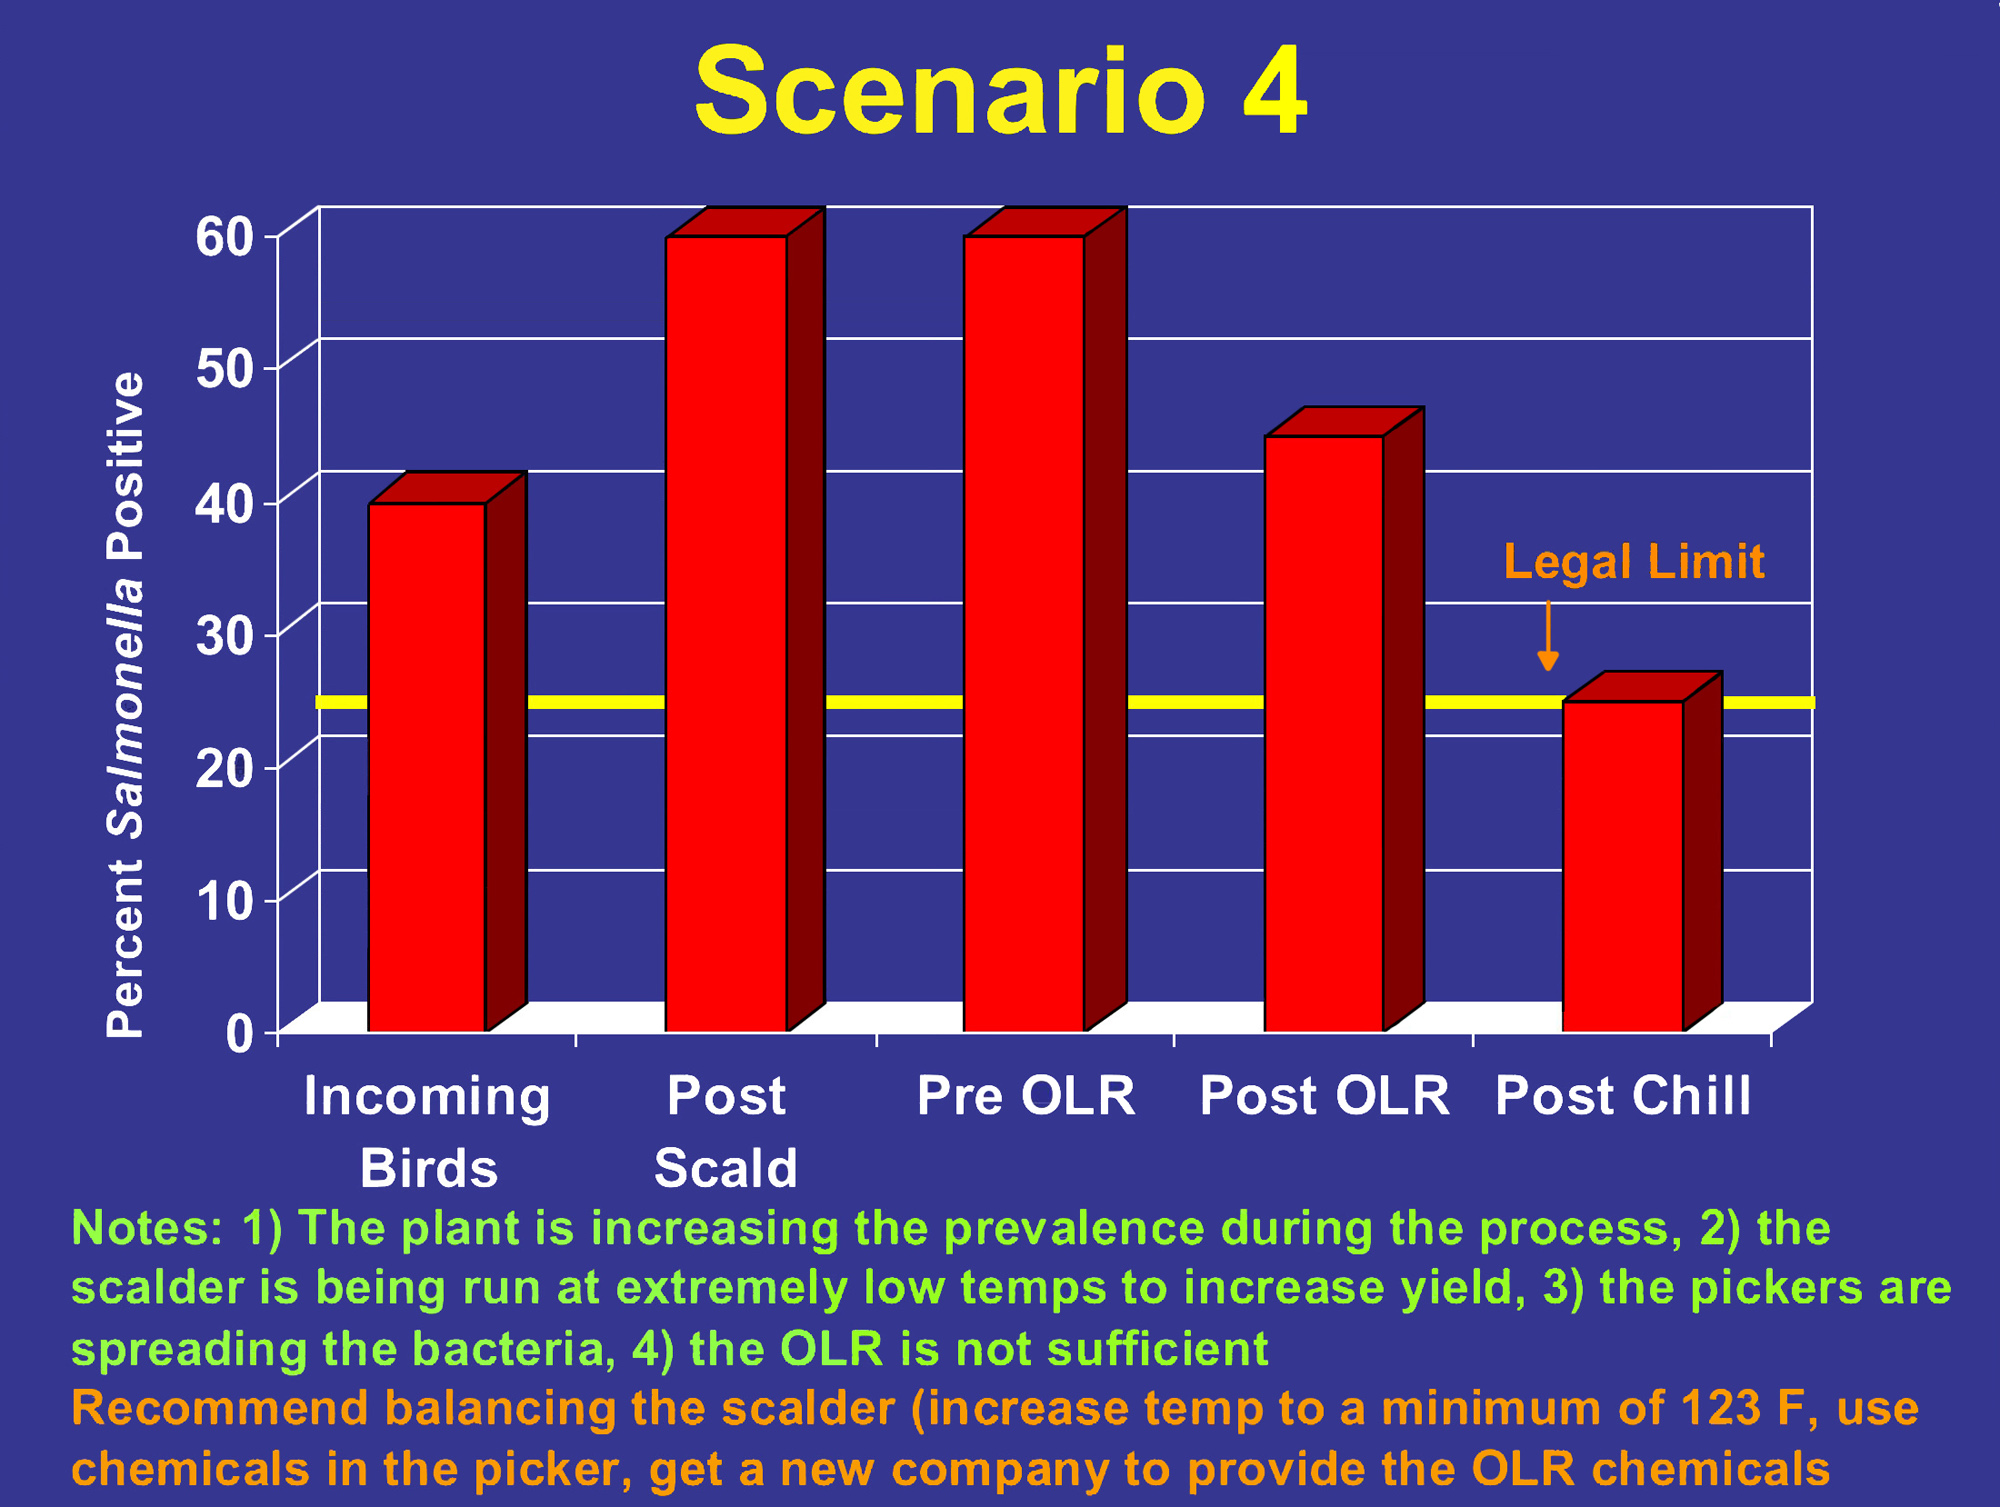 Bar graph showing percent of birds positive for salmonella throughout the plant process. Around 40% of incoming birds are positive. Post scald and pre OLR, 60% are positive. Post OLR, a little over 40% are positive. Post chill, around 23% are positive, near the legal limit